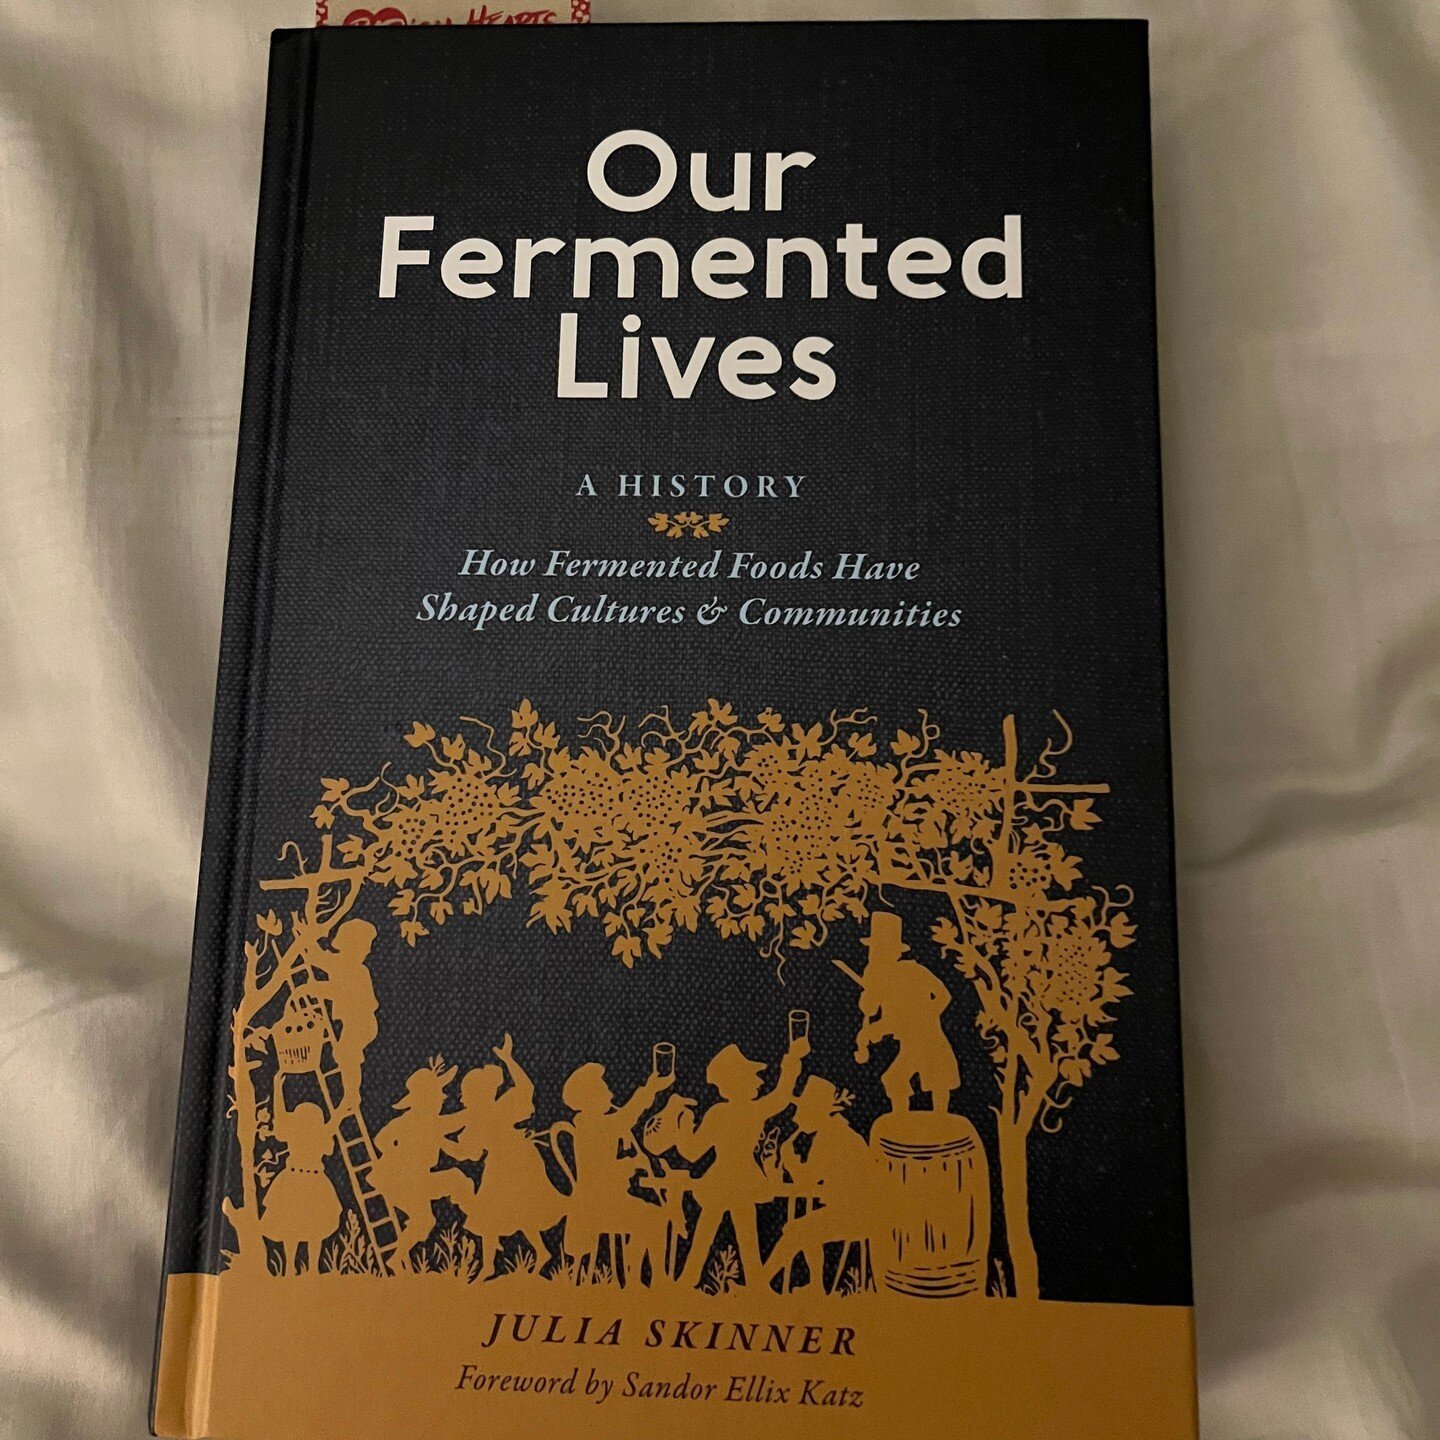 Our Fermented Lives by Julie Skinner⁠
⁠
This book checks ALL the boxes ... okay NOT SMUT ;) but...⁠
⁠
The topics of History and Food are brought together and beautifully written spanning cultures that not only survived but thrived by using the bounty